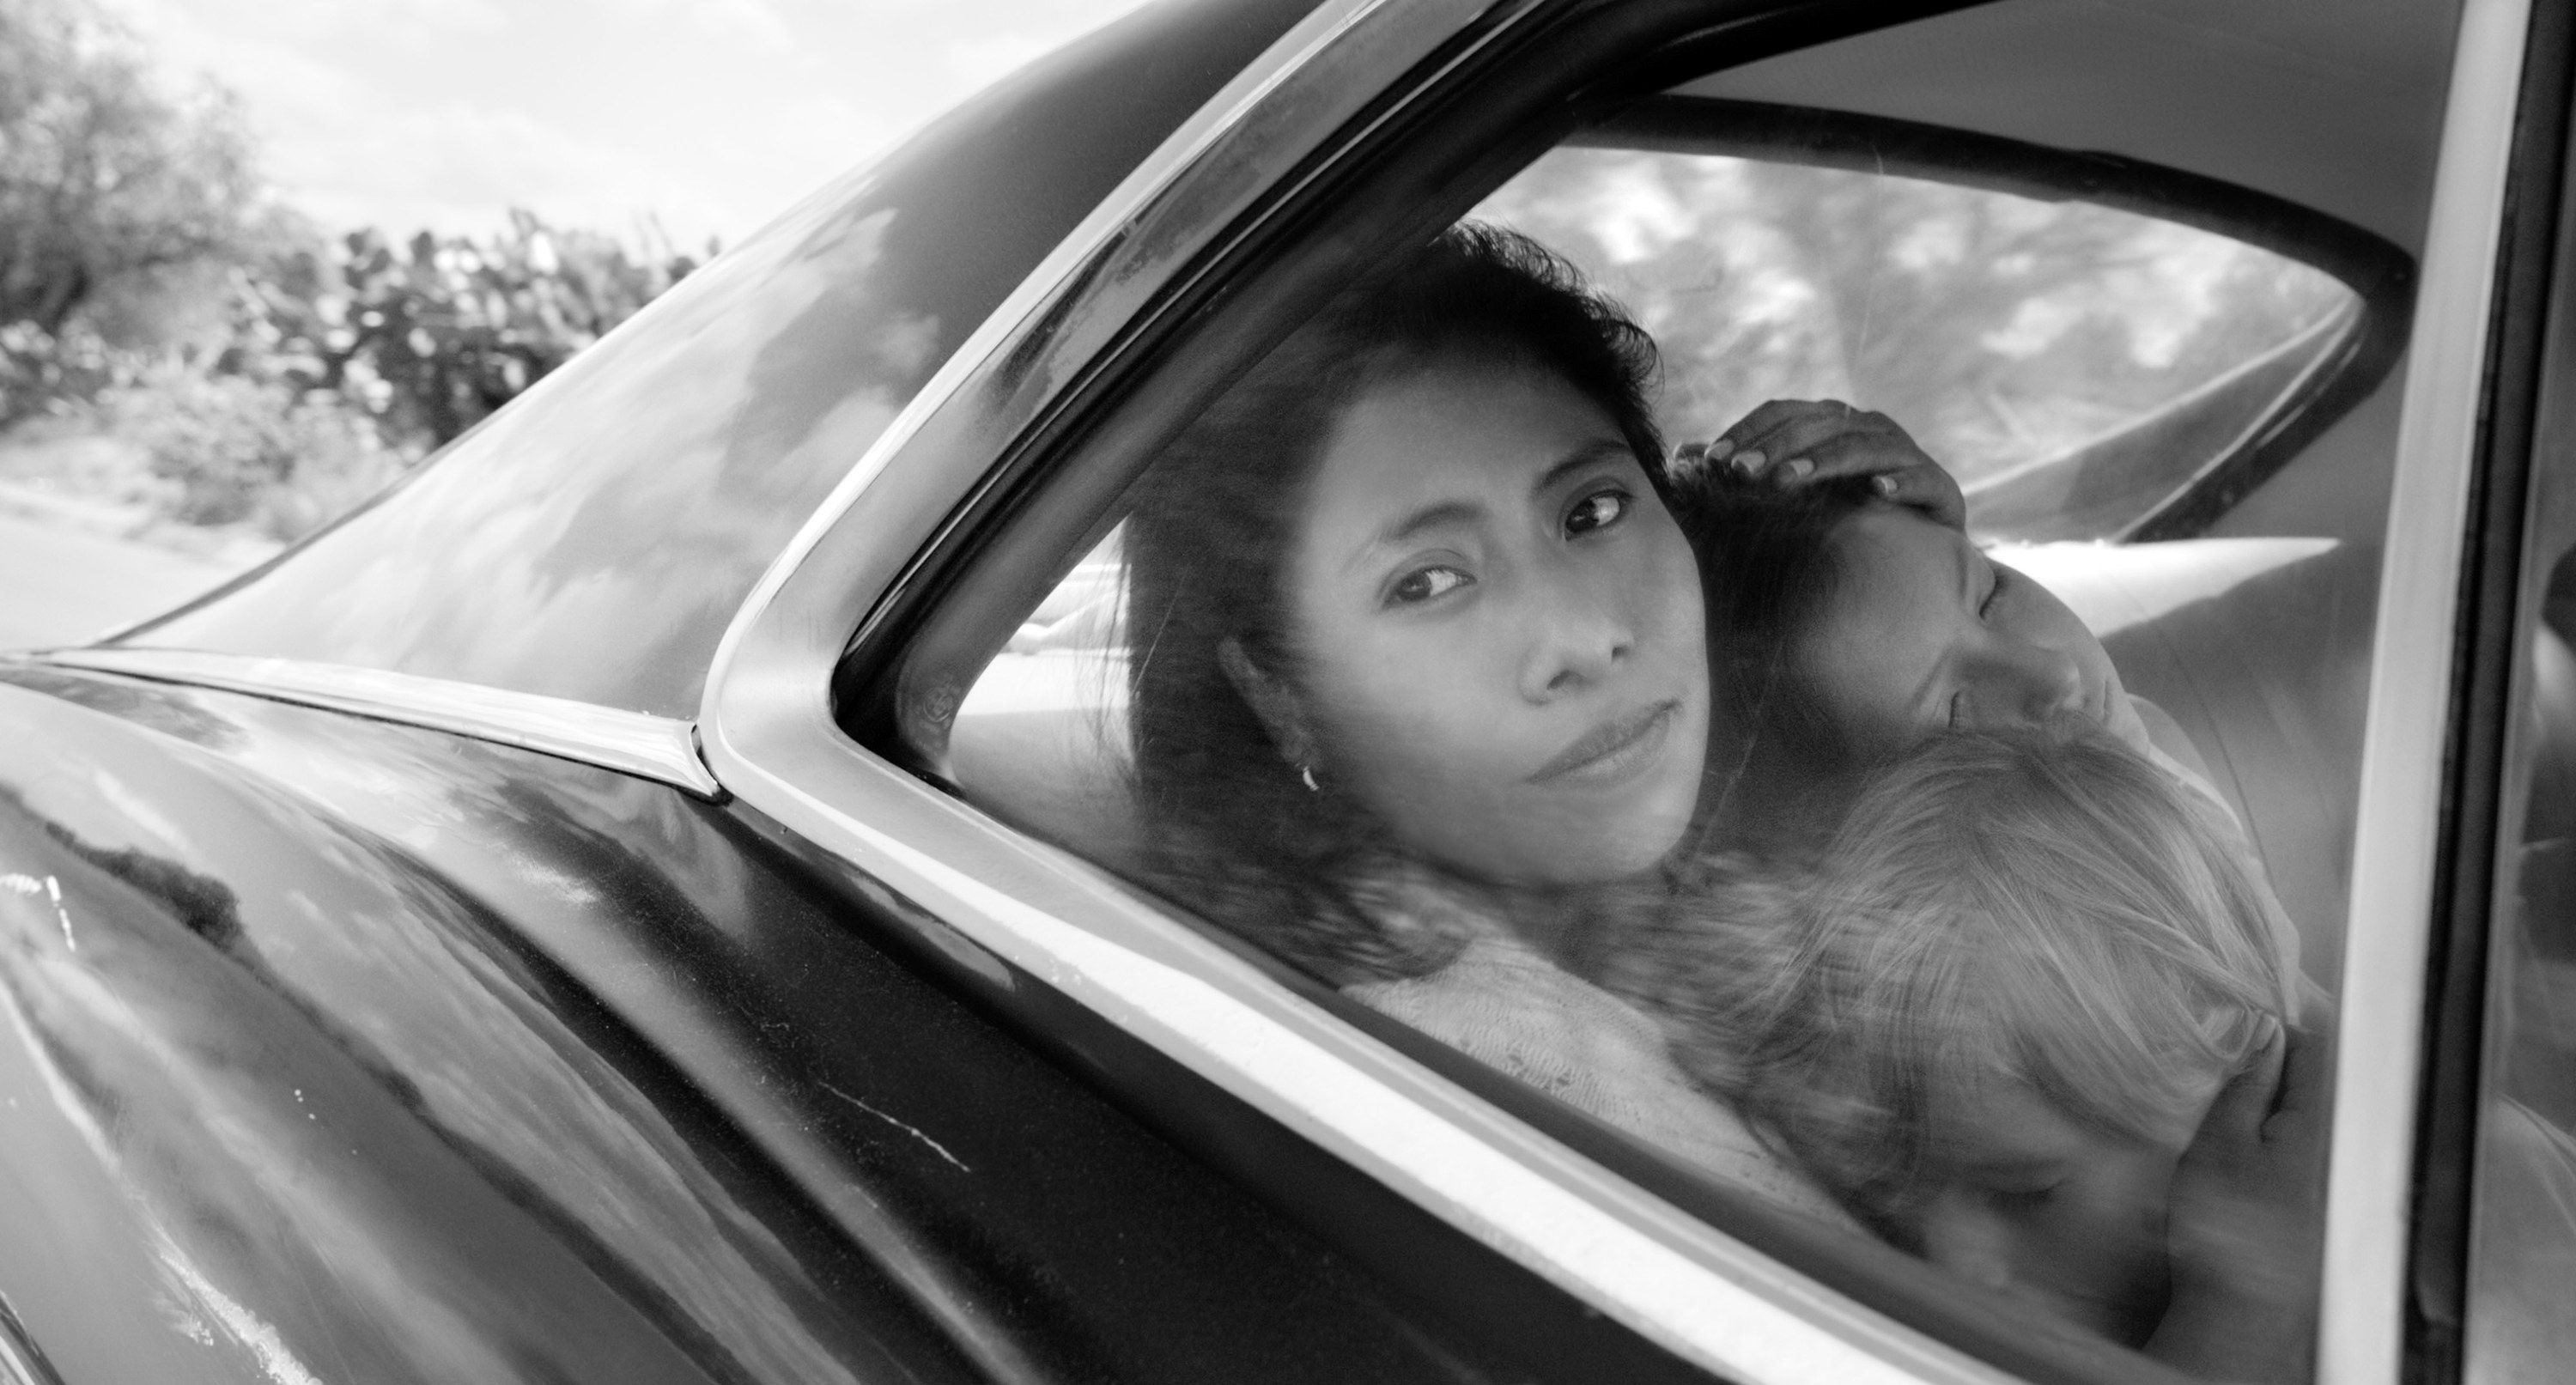 Yalitza in the back of a car looking out the window